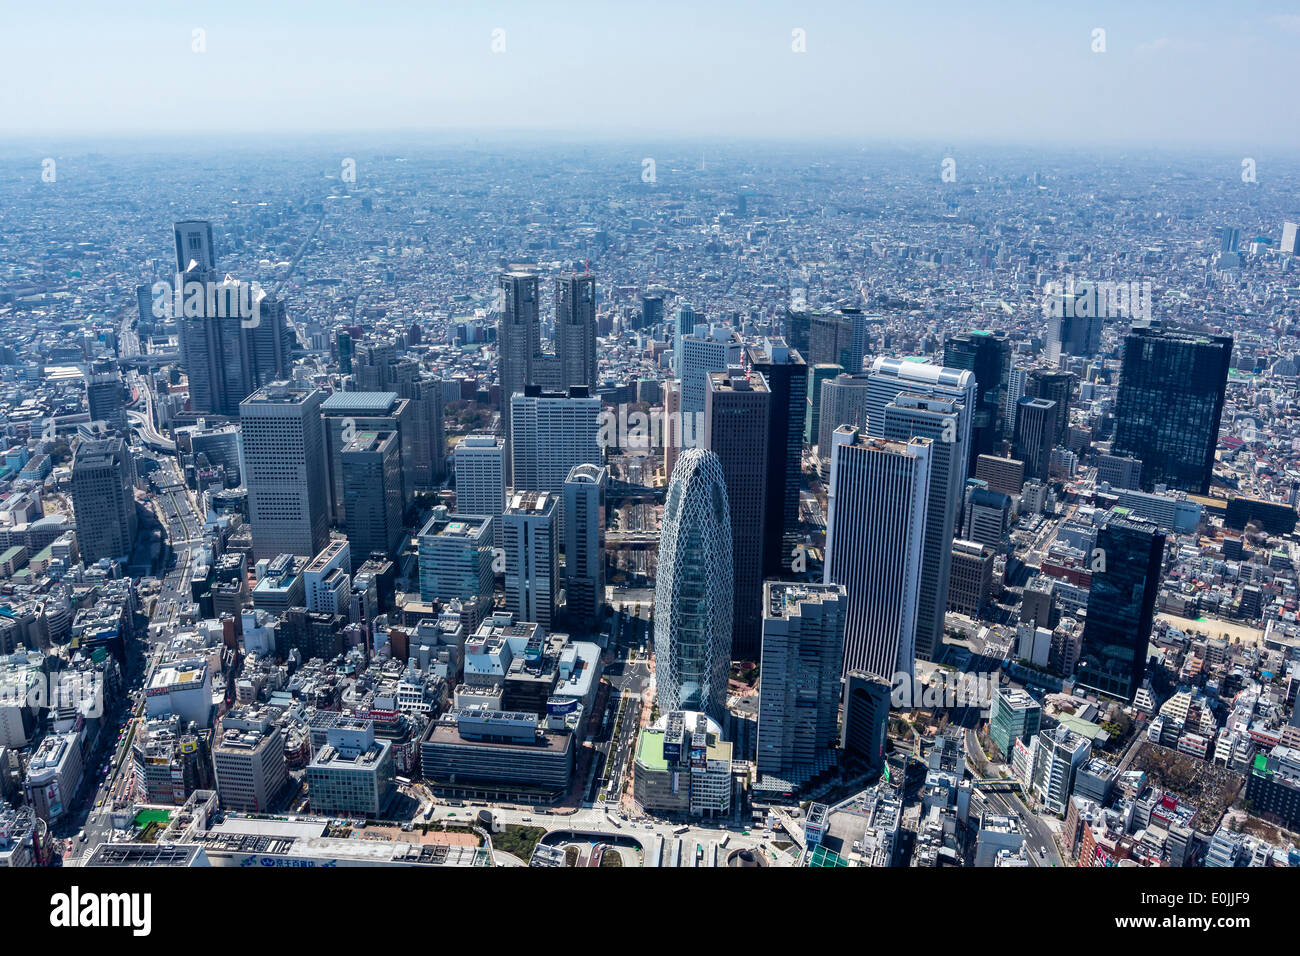 Aerial view of Tokyo Stock Photo